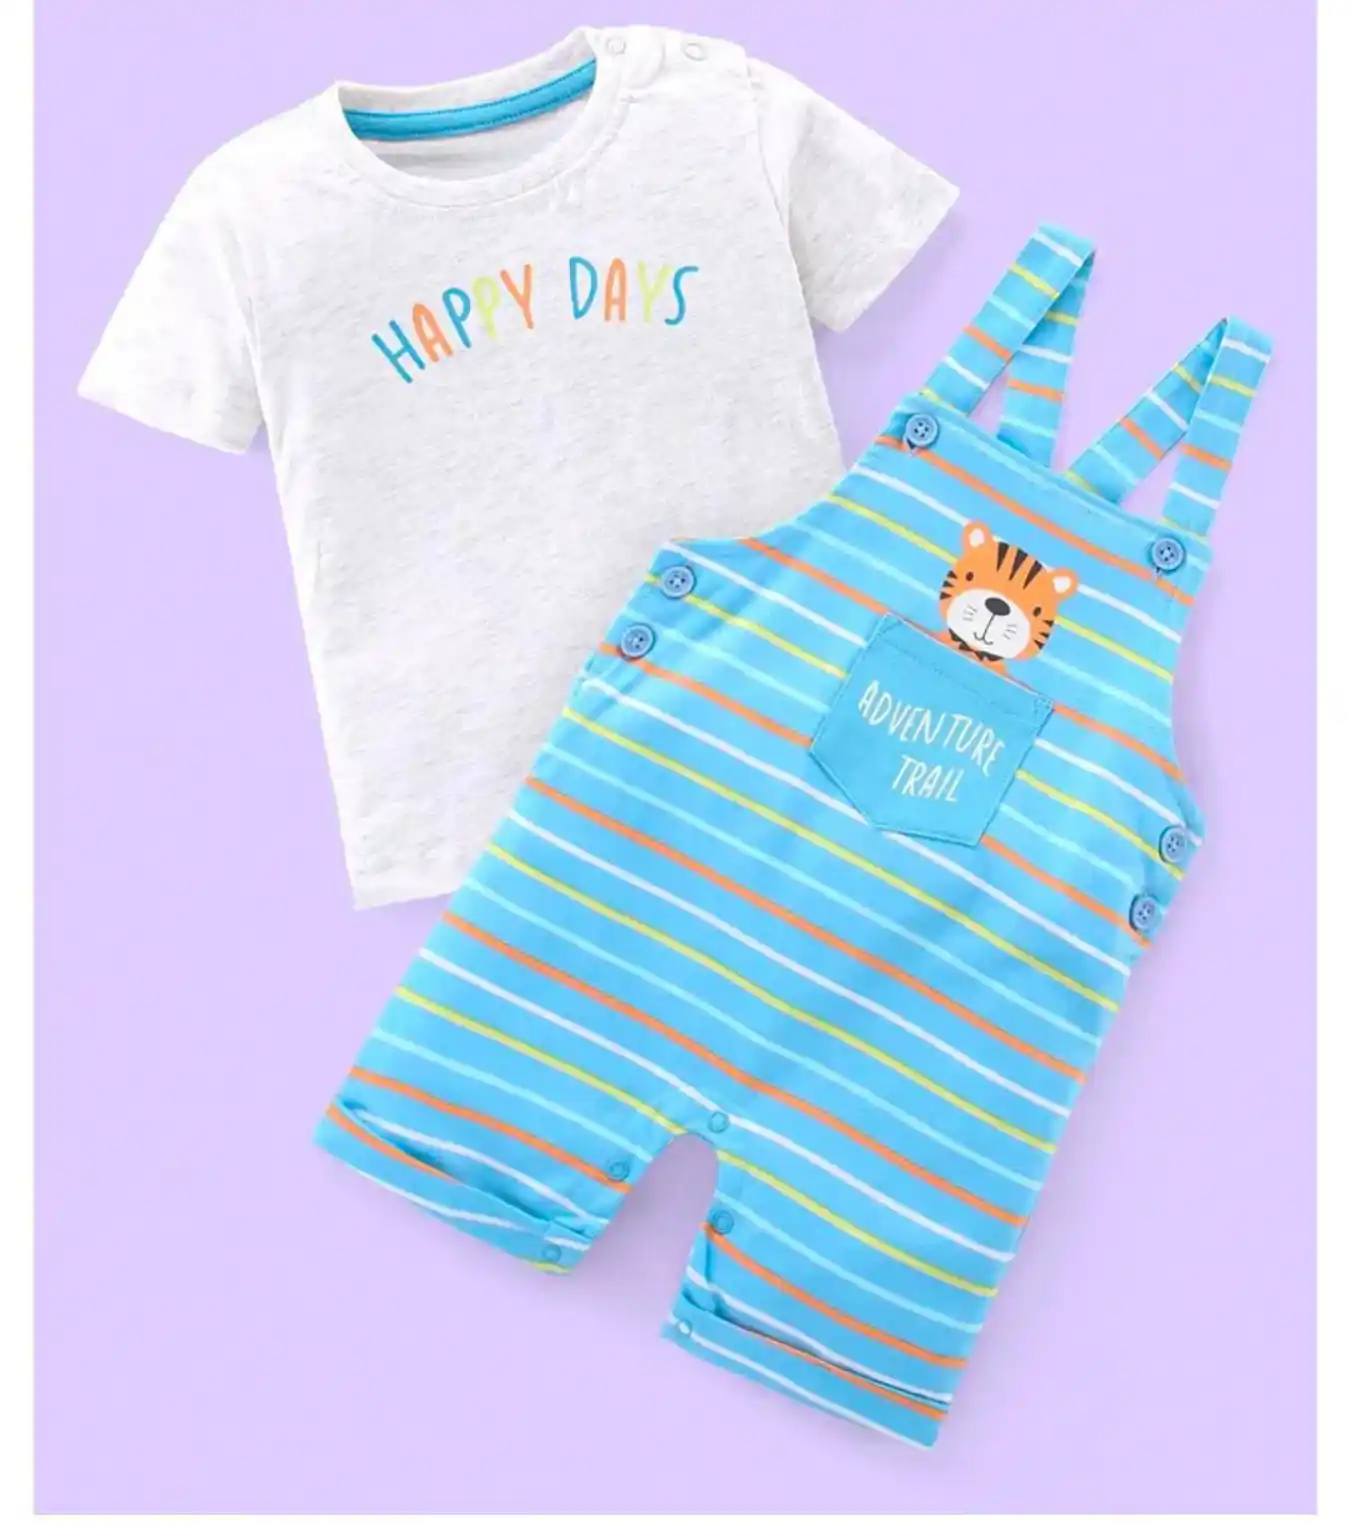 100% Cotton Knit Dungaree & Half Sleeves T-Shirt Set Text Print With Striped Blue & White